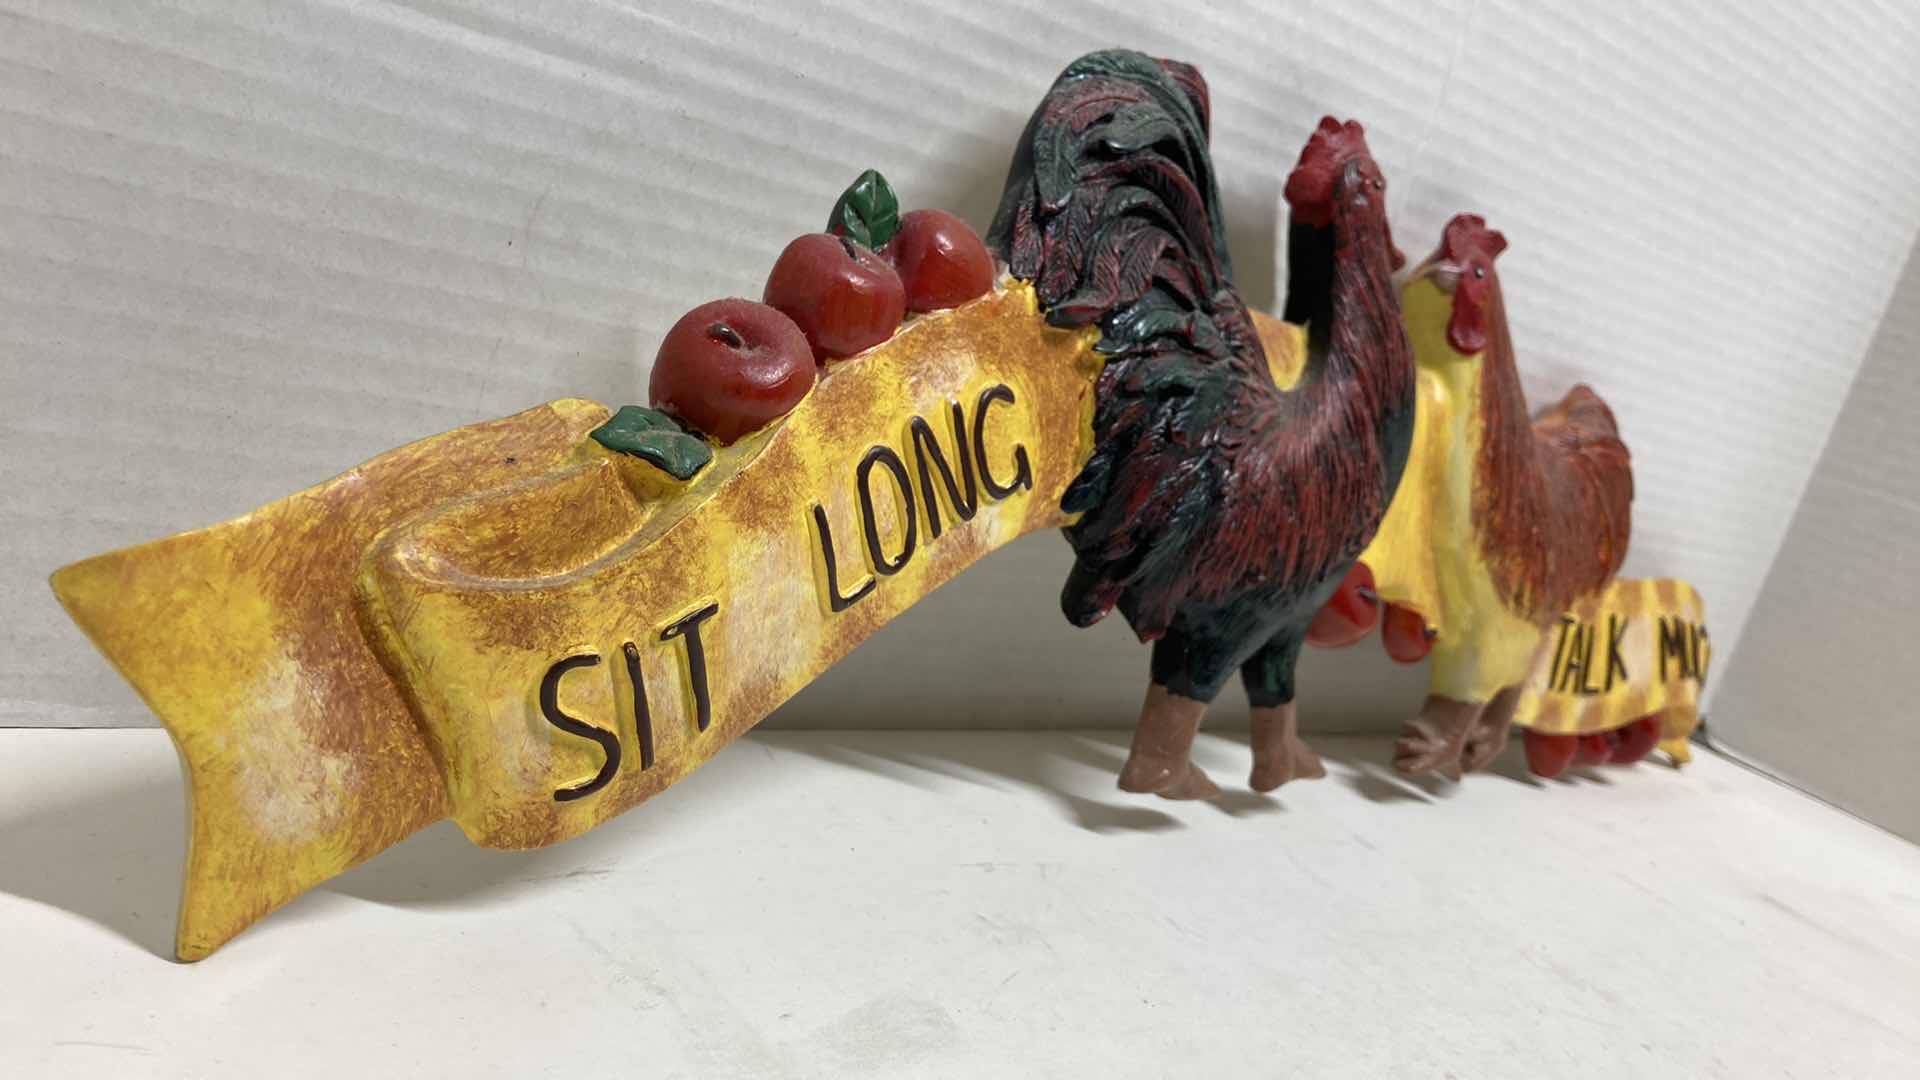 Photo 2 of ROOSTER SIT LONG TALK MUCH DECORATIVE RESIN SIGN 21” X 7”